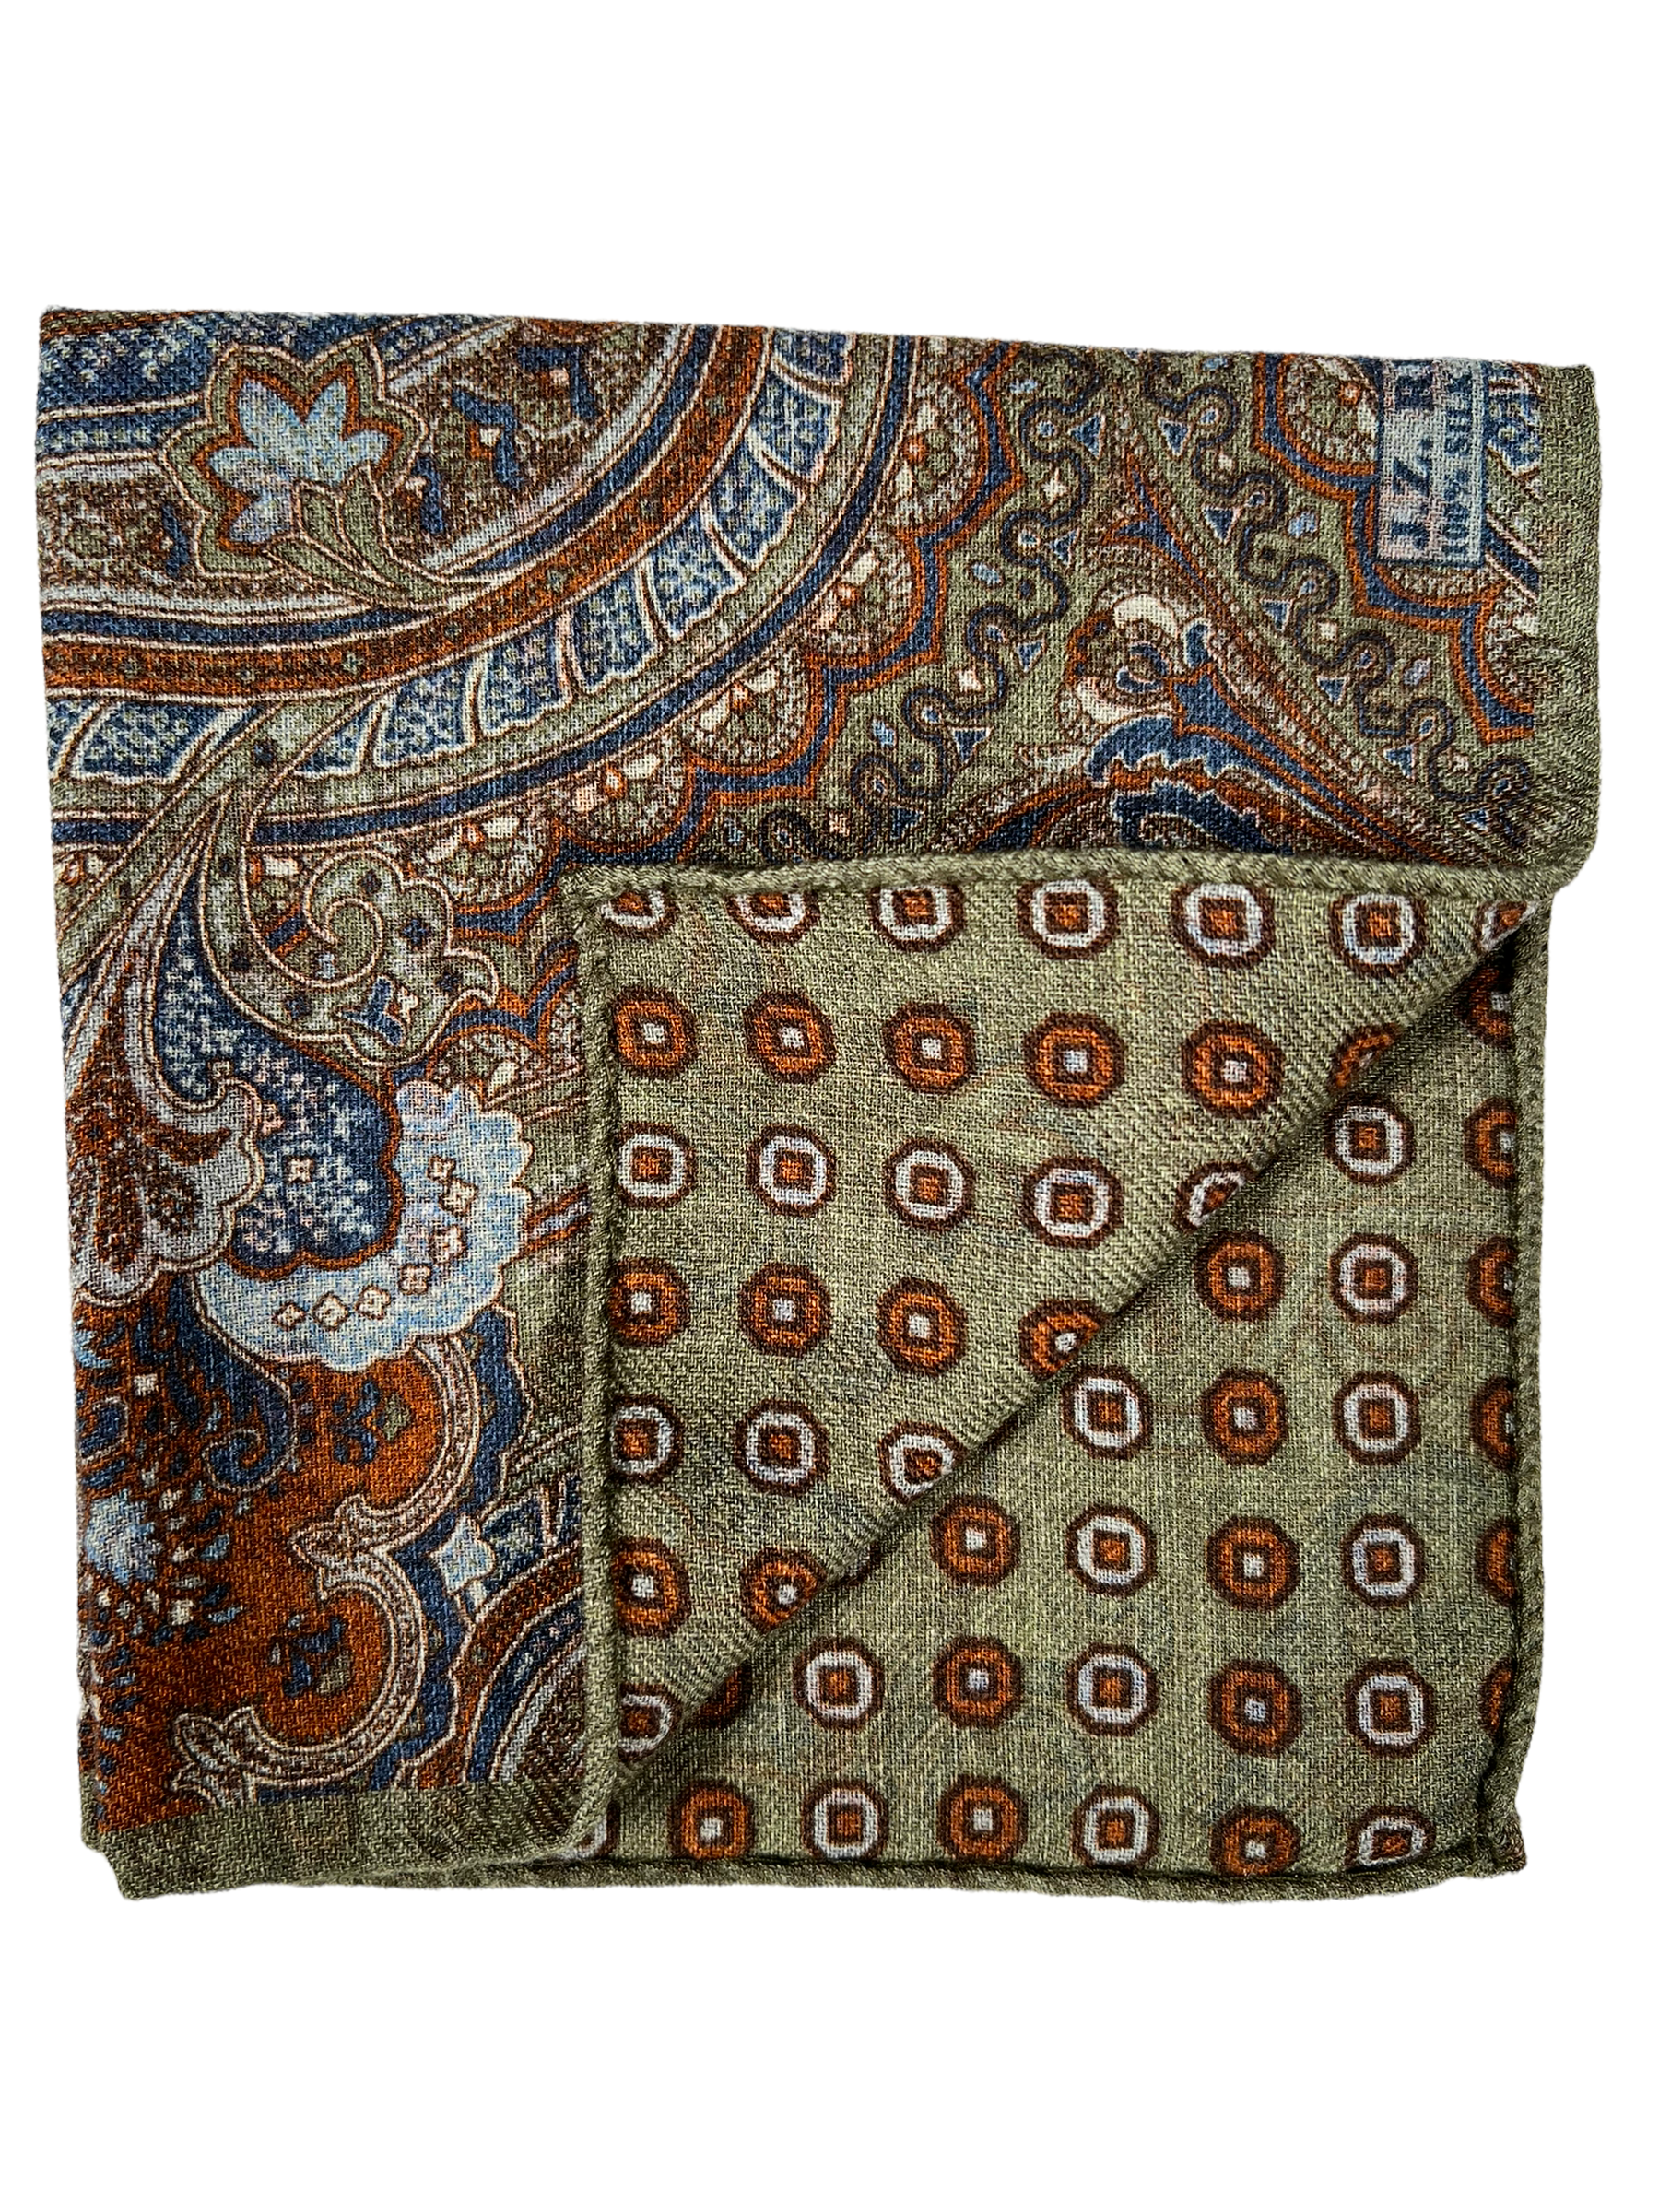 JZ RICHARDS DOUBLE PRINTED WOOL PAISLEY POCKET SQUARE - OLIVE